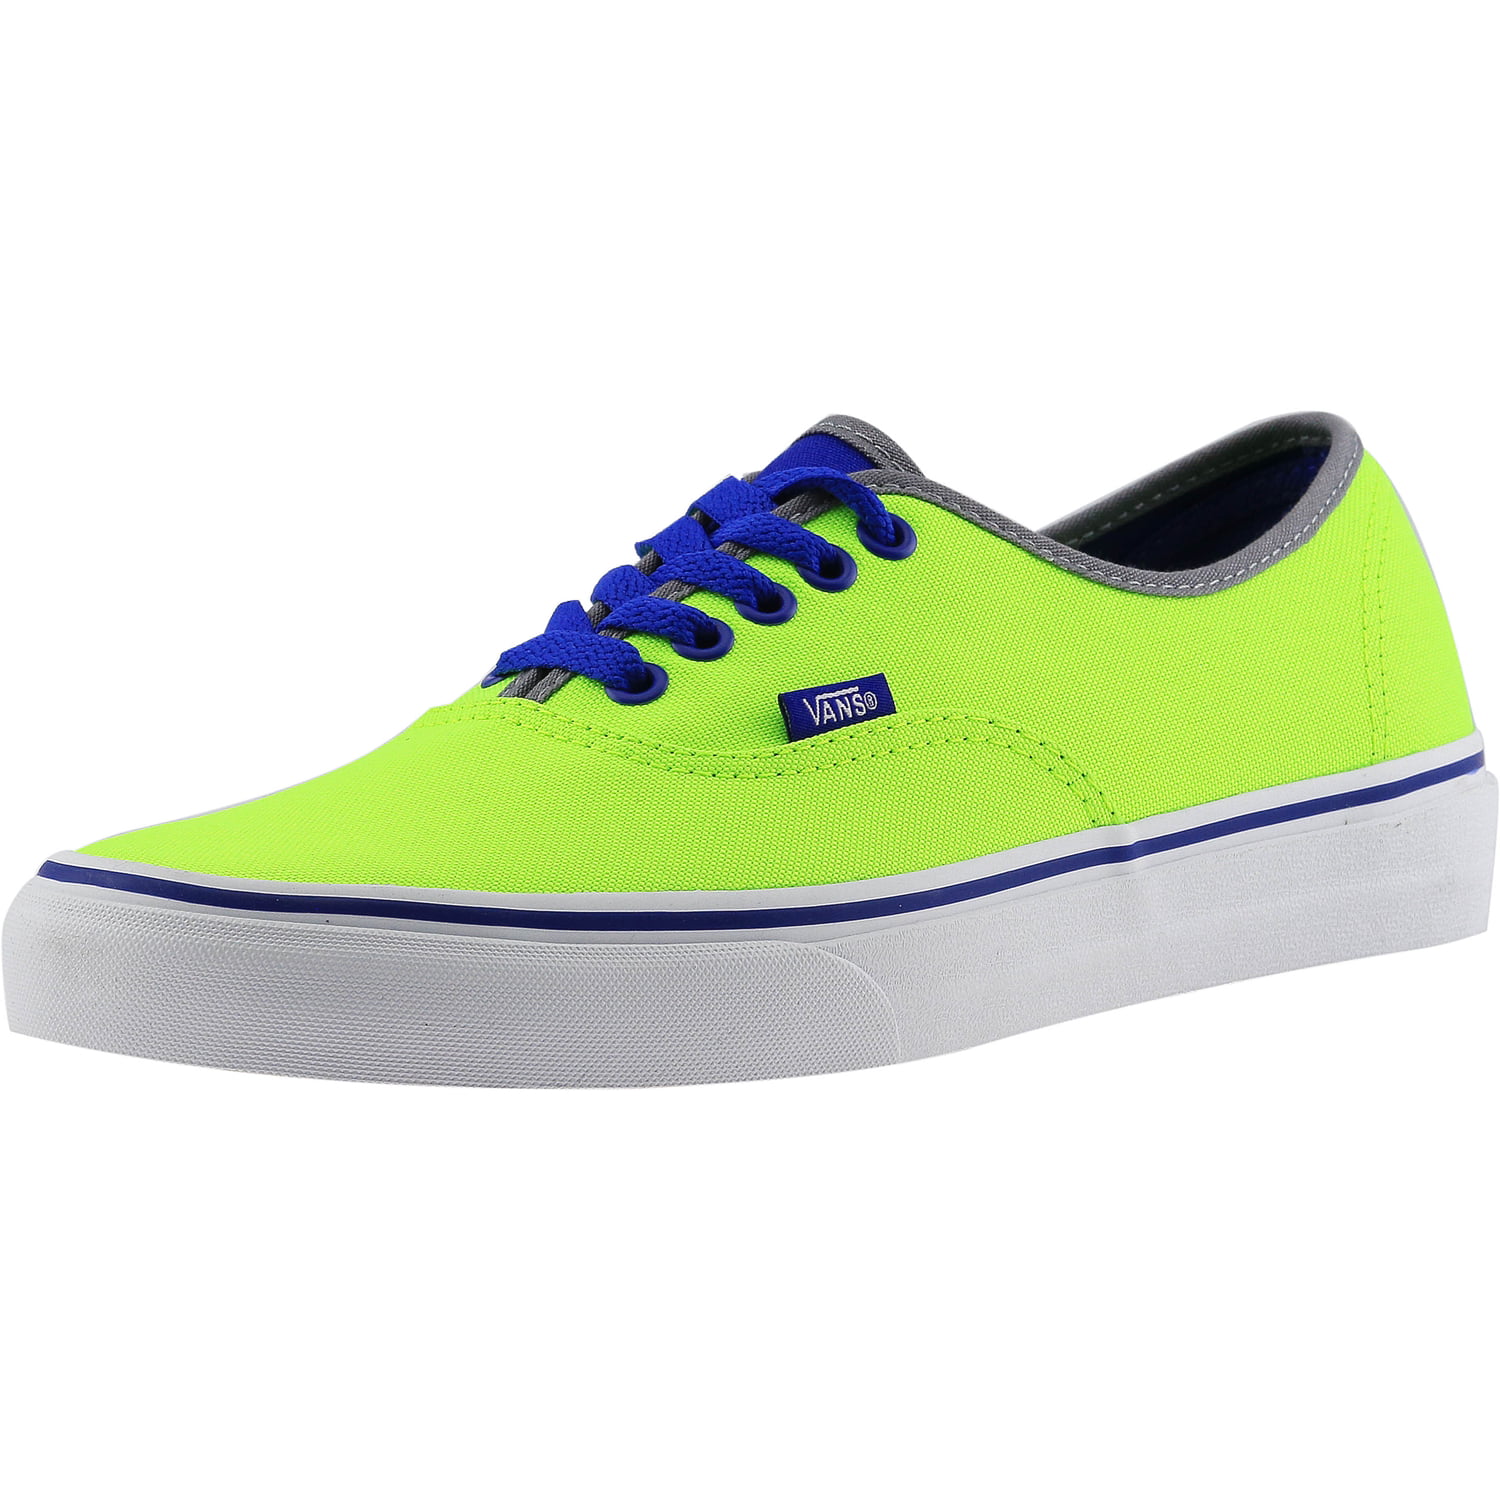 blue and green vans